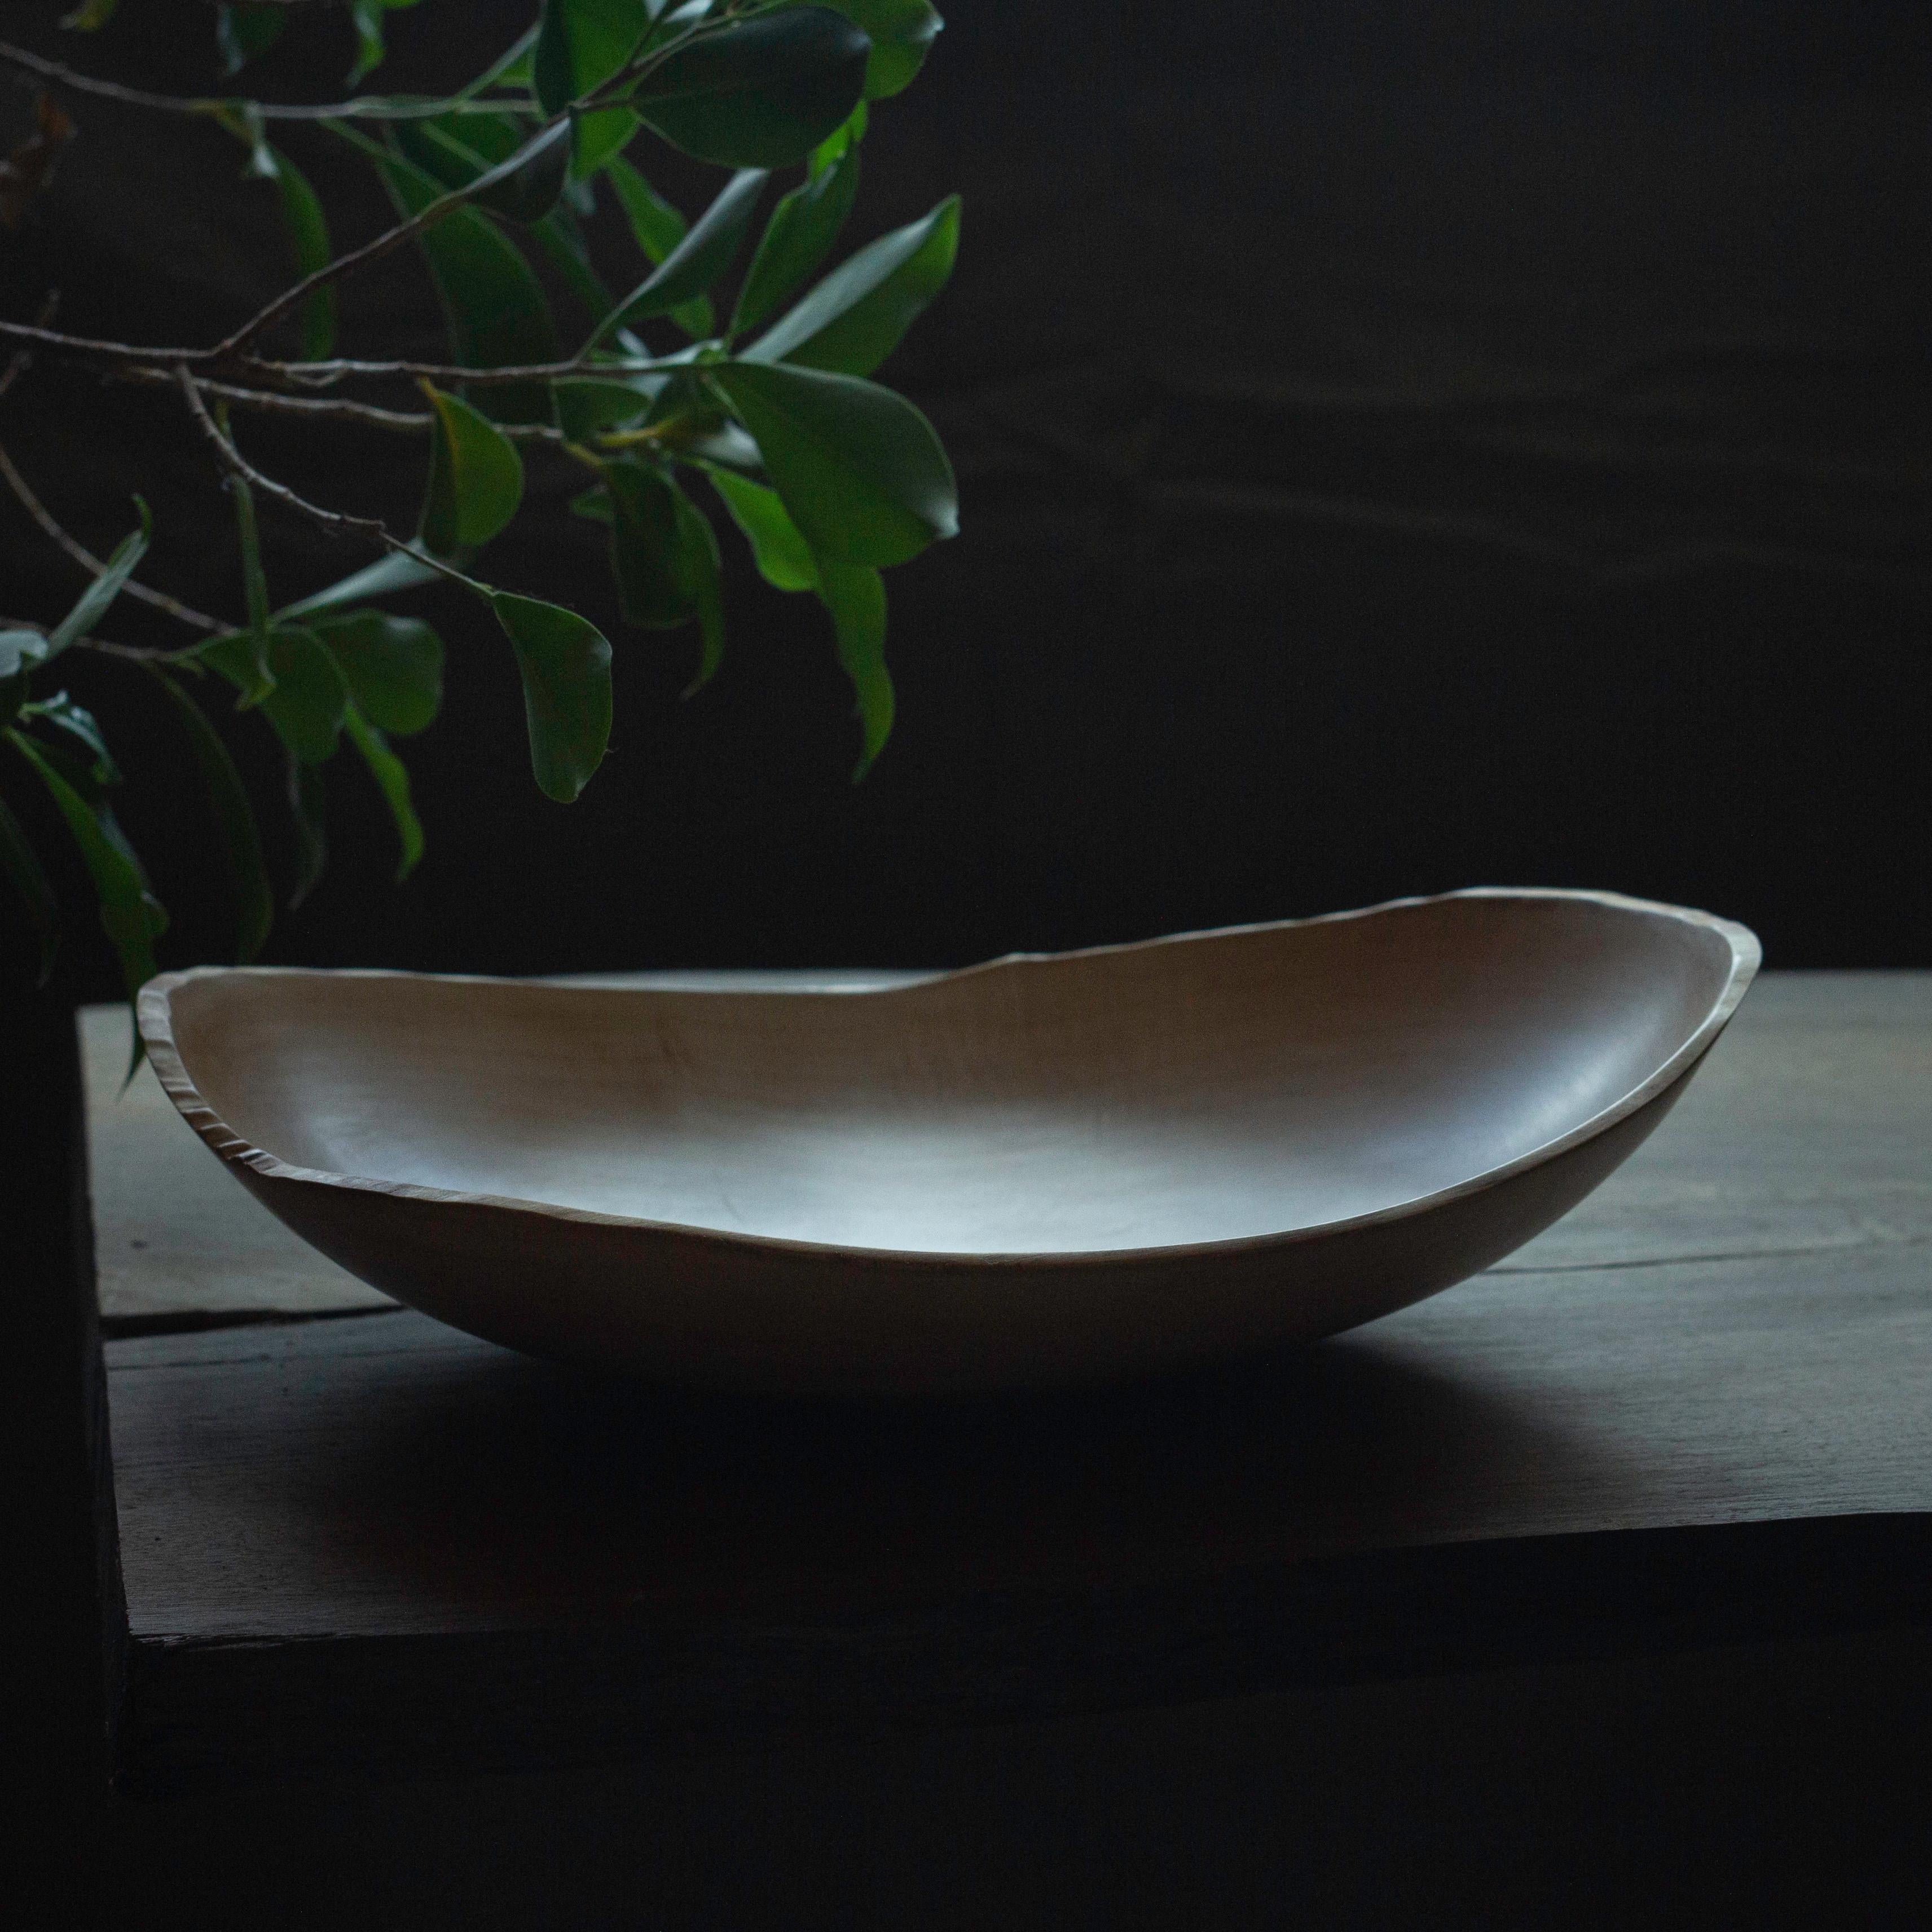 Contemporary Sycamore Maple Bowl by Vlad Droz